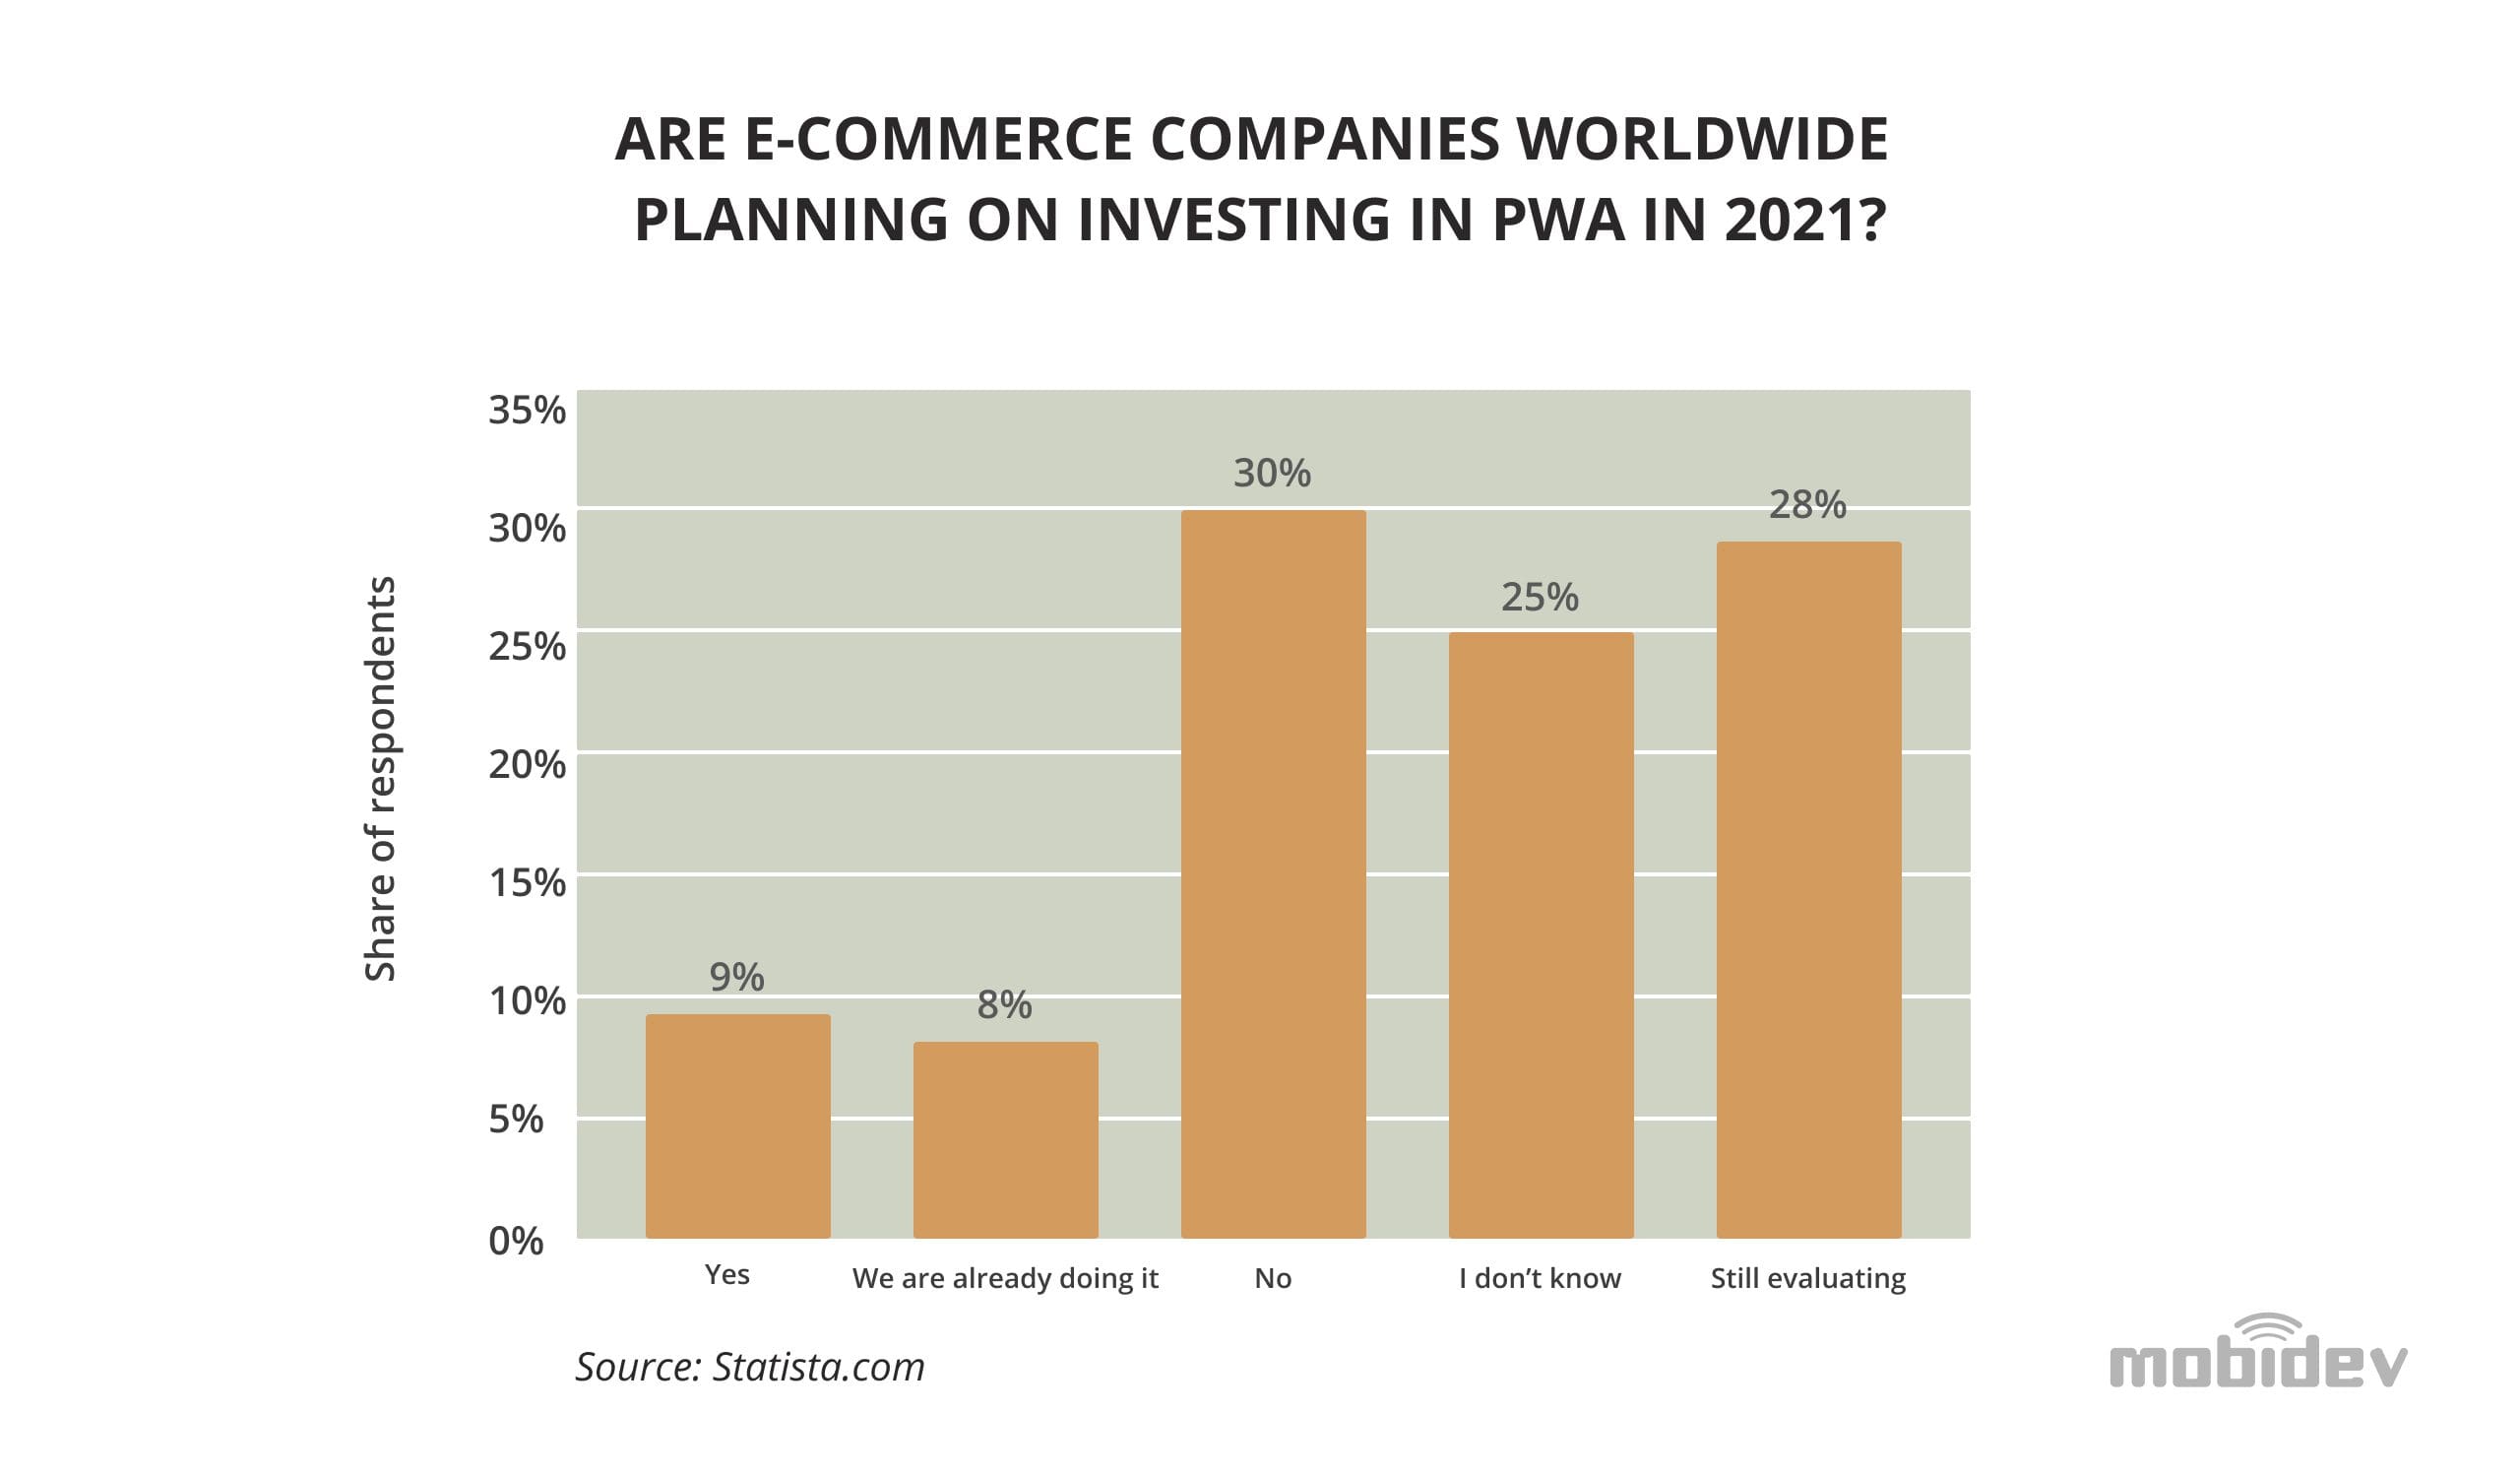 Share of E-commerce Companies Worldwide Planning on Investing in Progressive Web Apps (PWA) in 2021